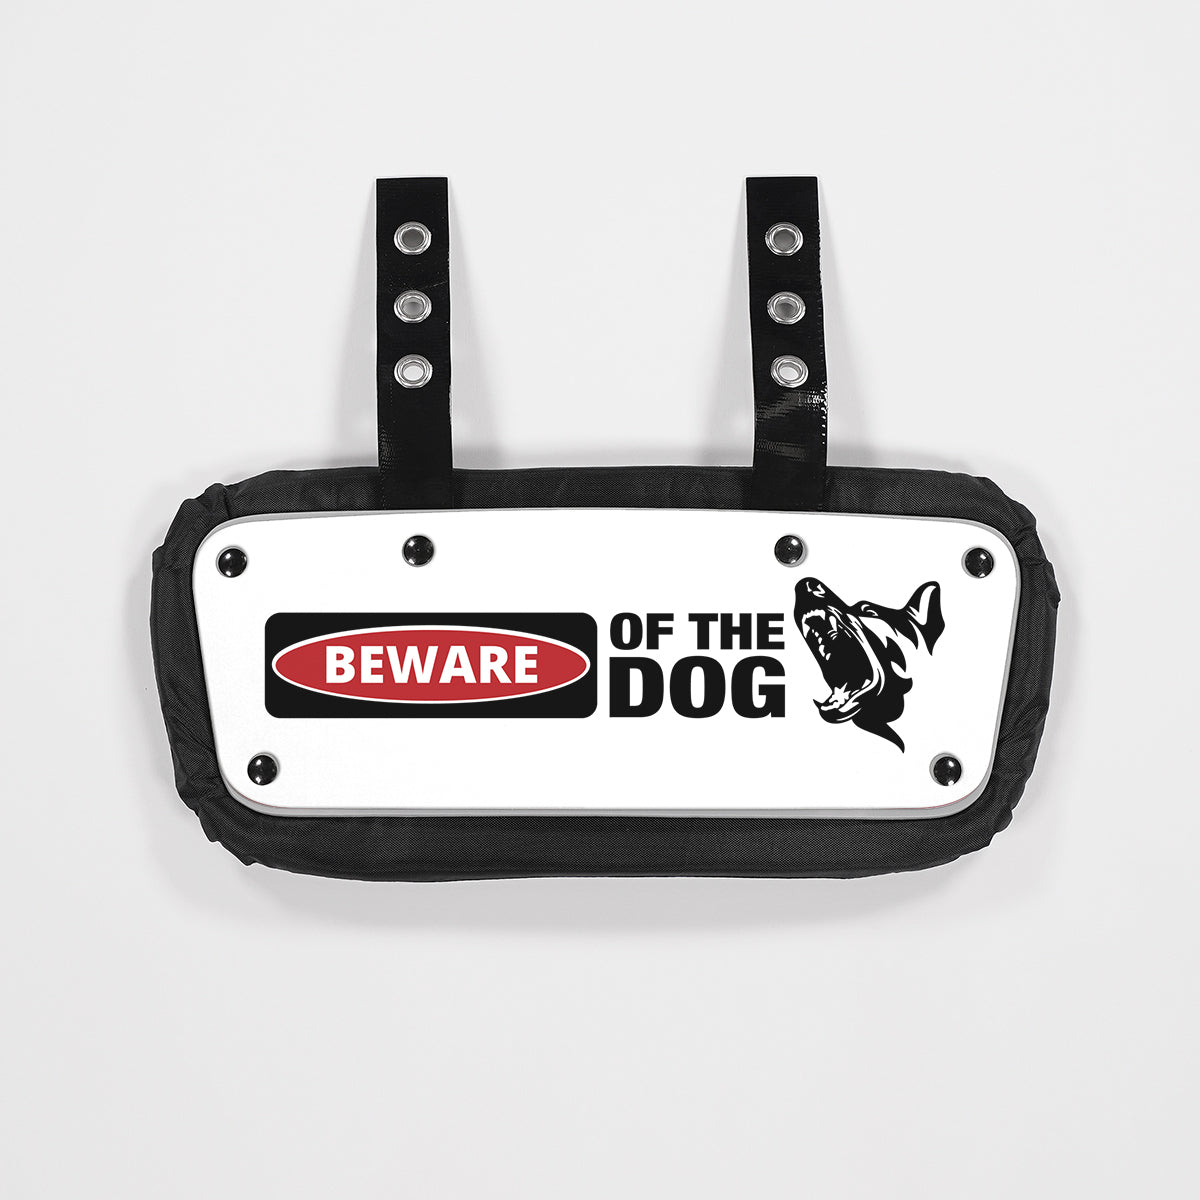 Beware of the Dog Sticker for Back Plate